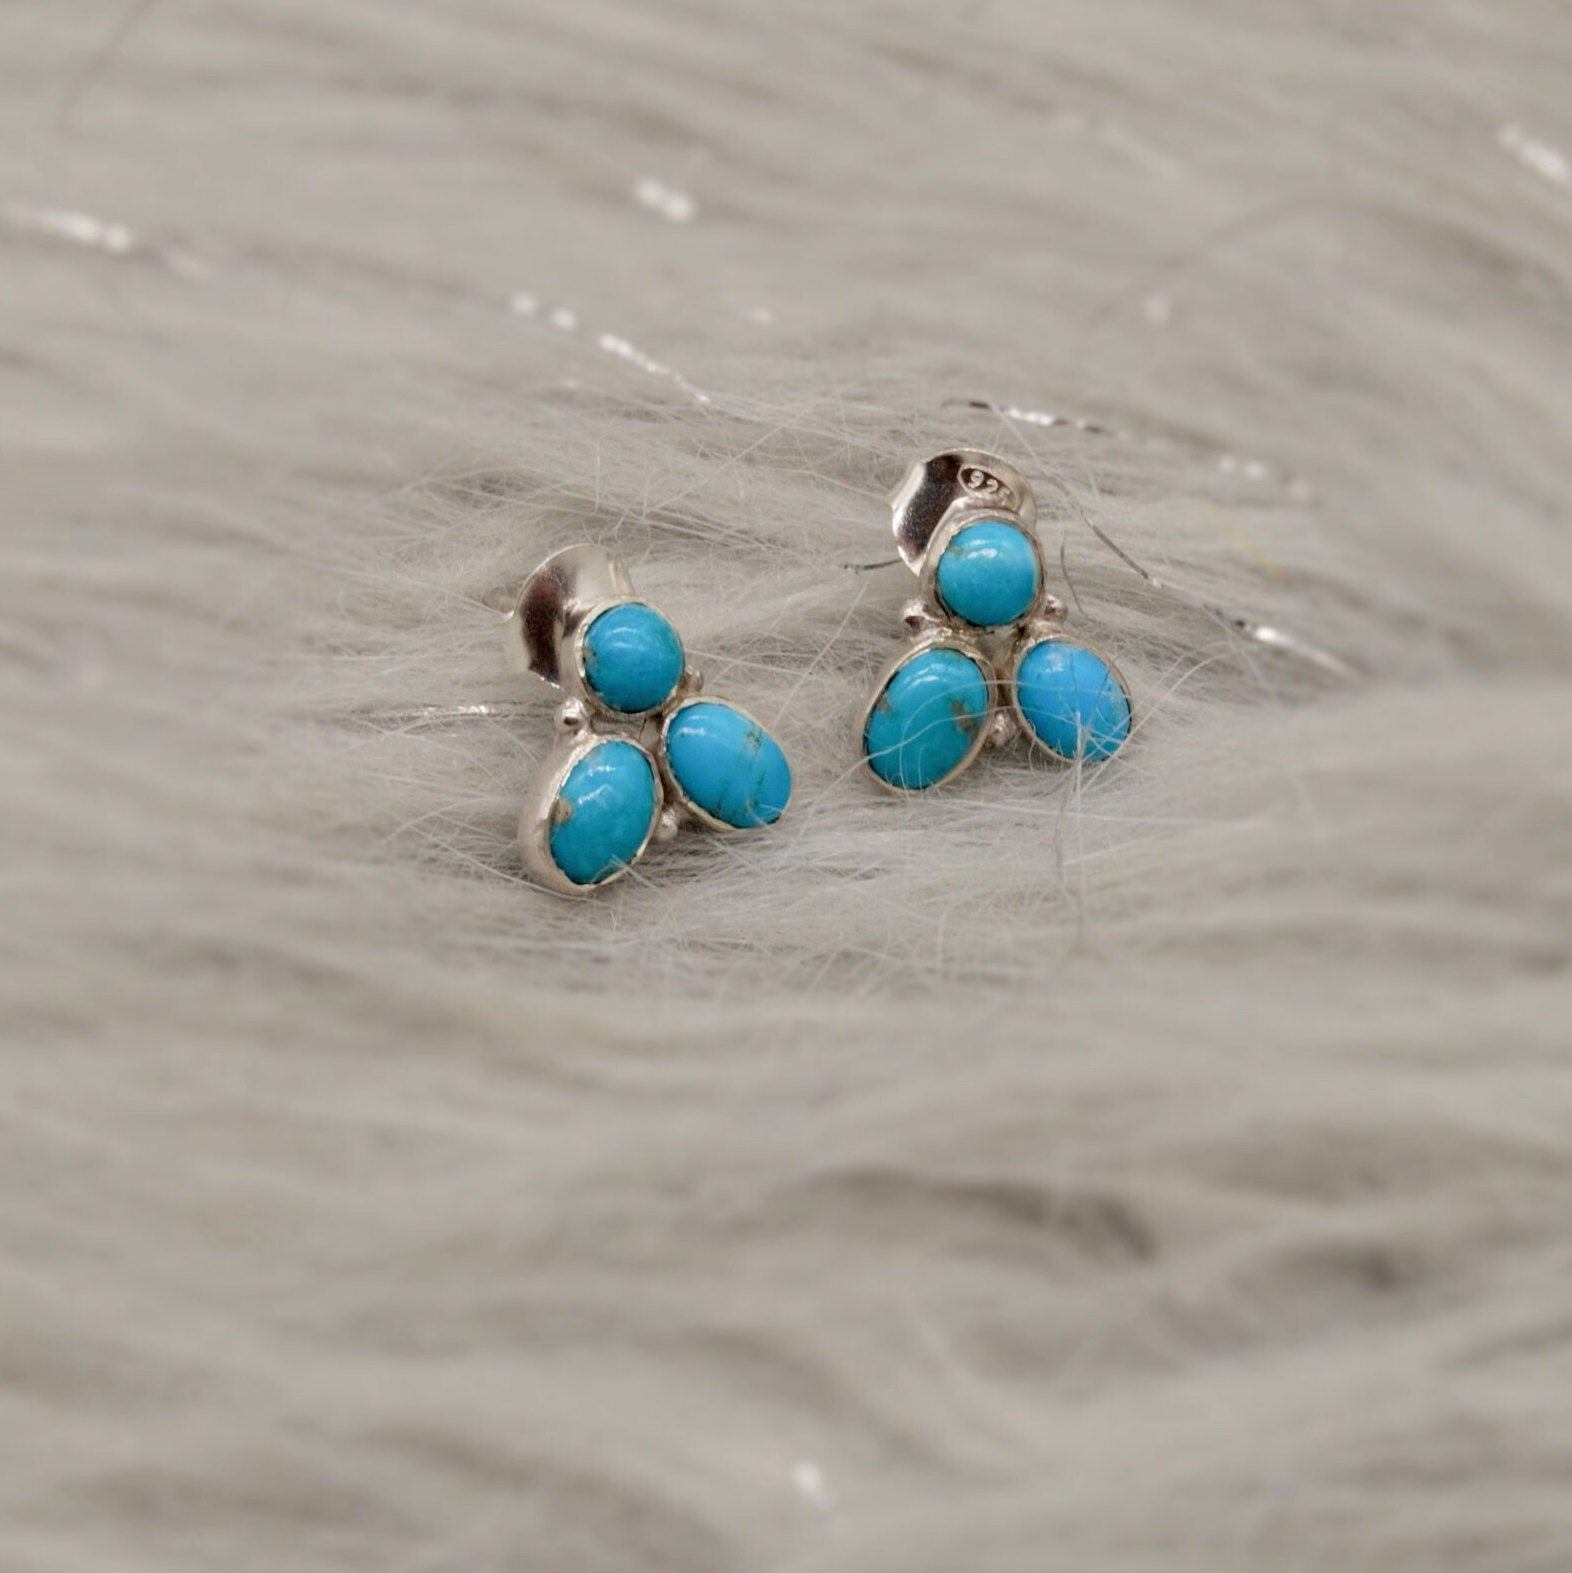 Turquoise Silver Stud Earrings Set, 925 Silver Studs, Turquoise Jewelry, December Birthstone, Gemstone Studs, Gifts For Her